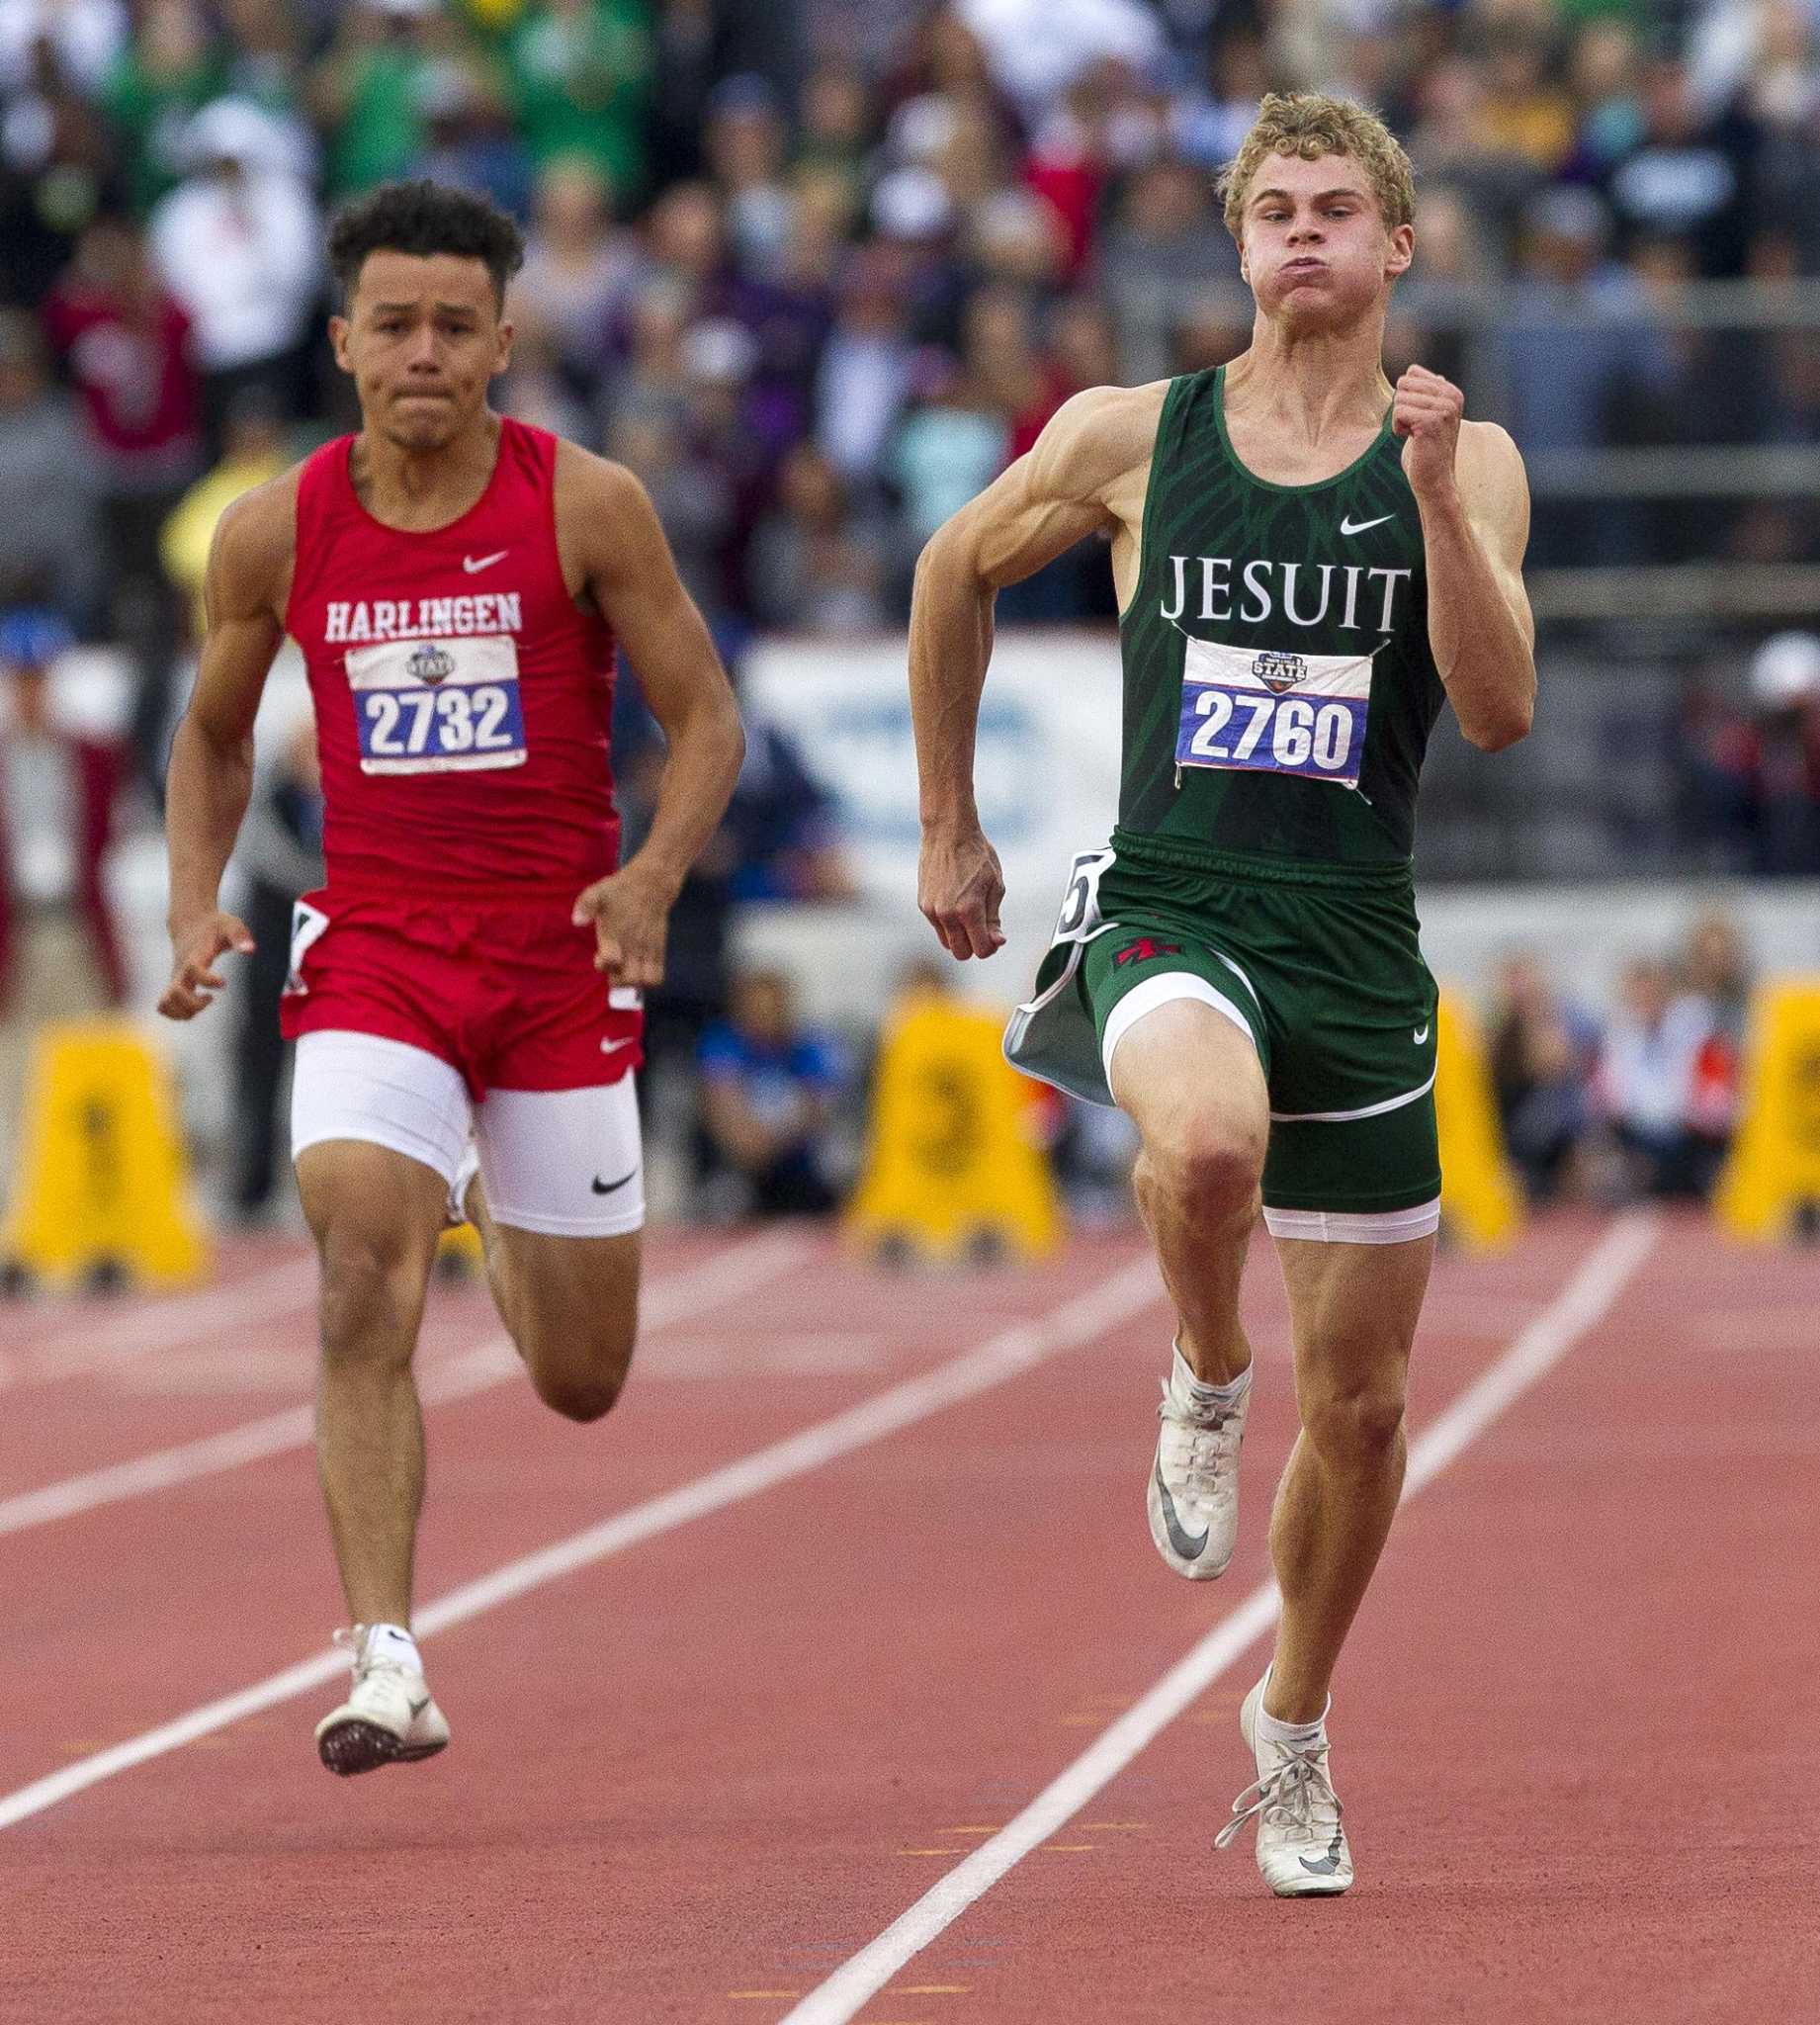 Houston area has plenty to boast about after UIL state track and field